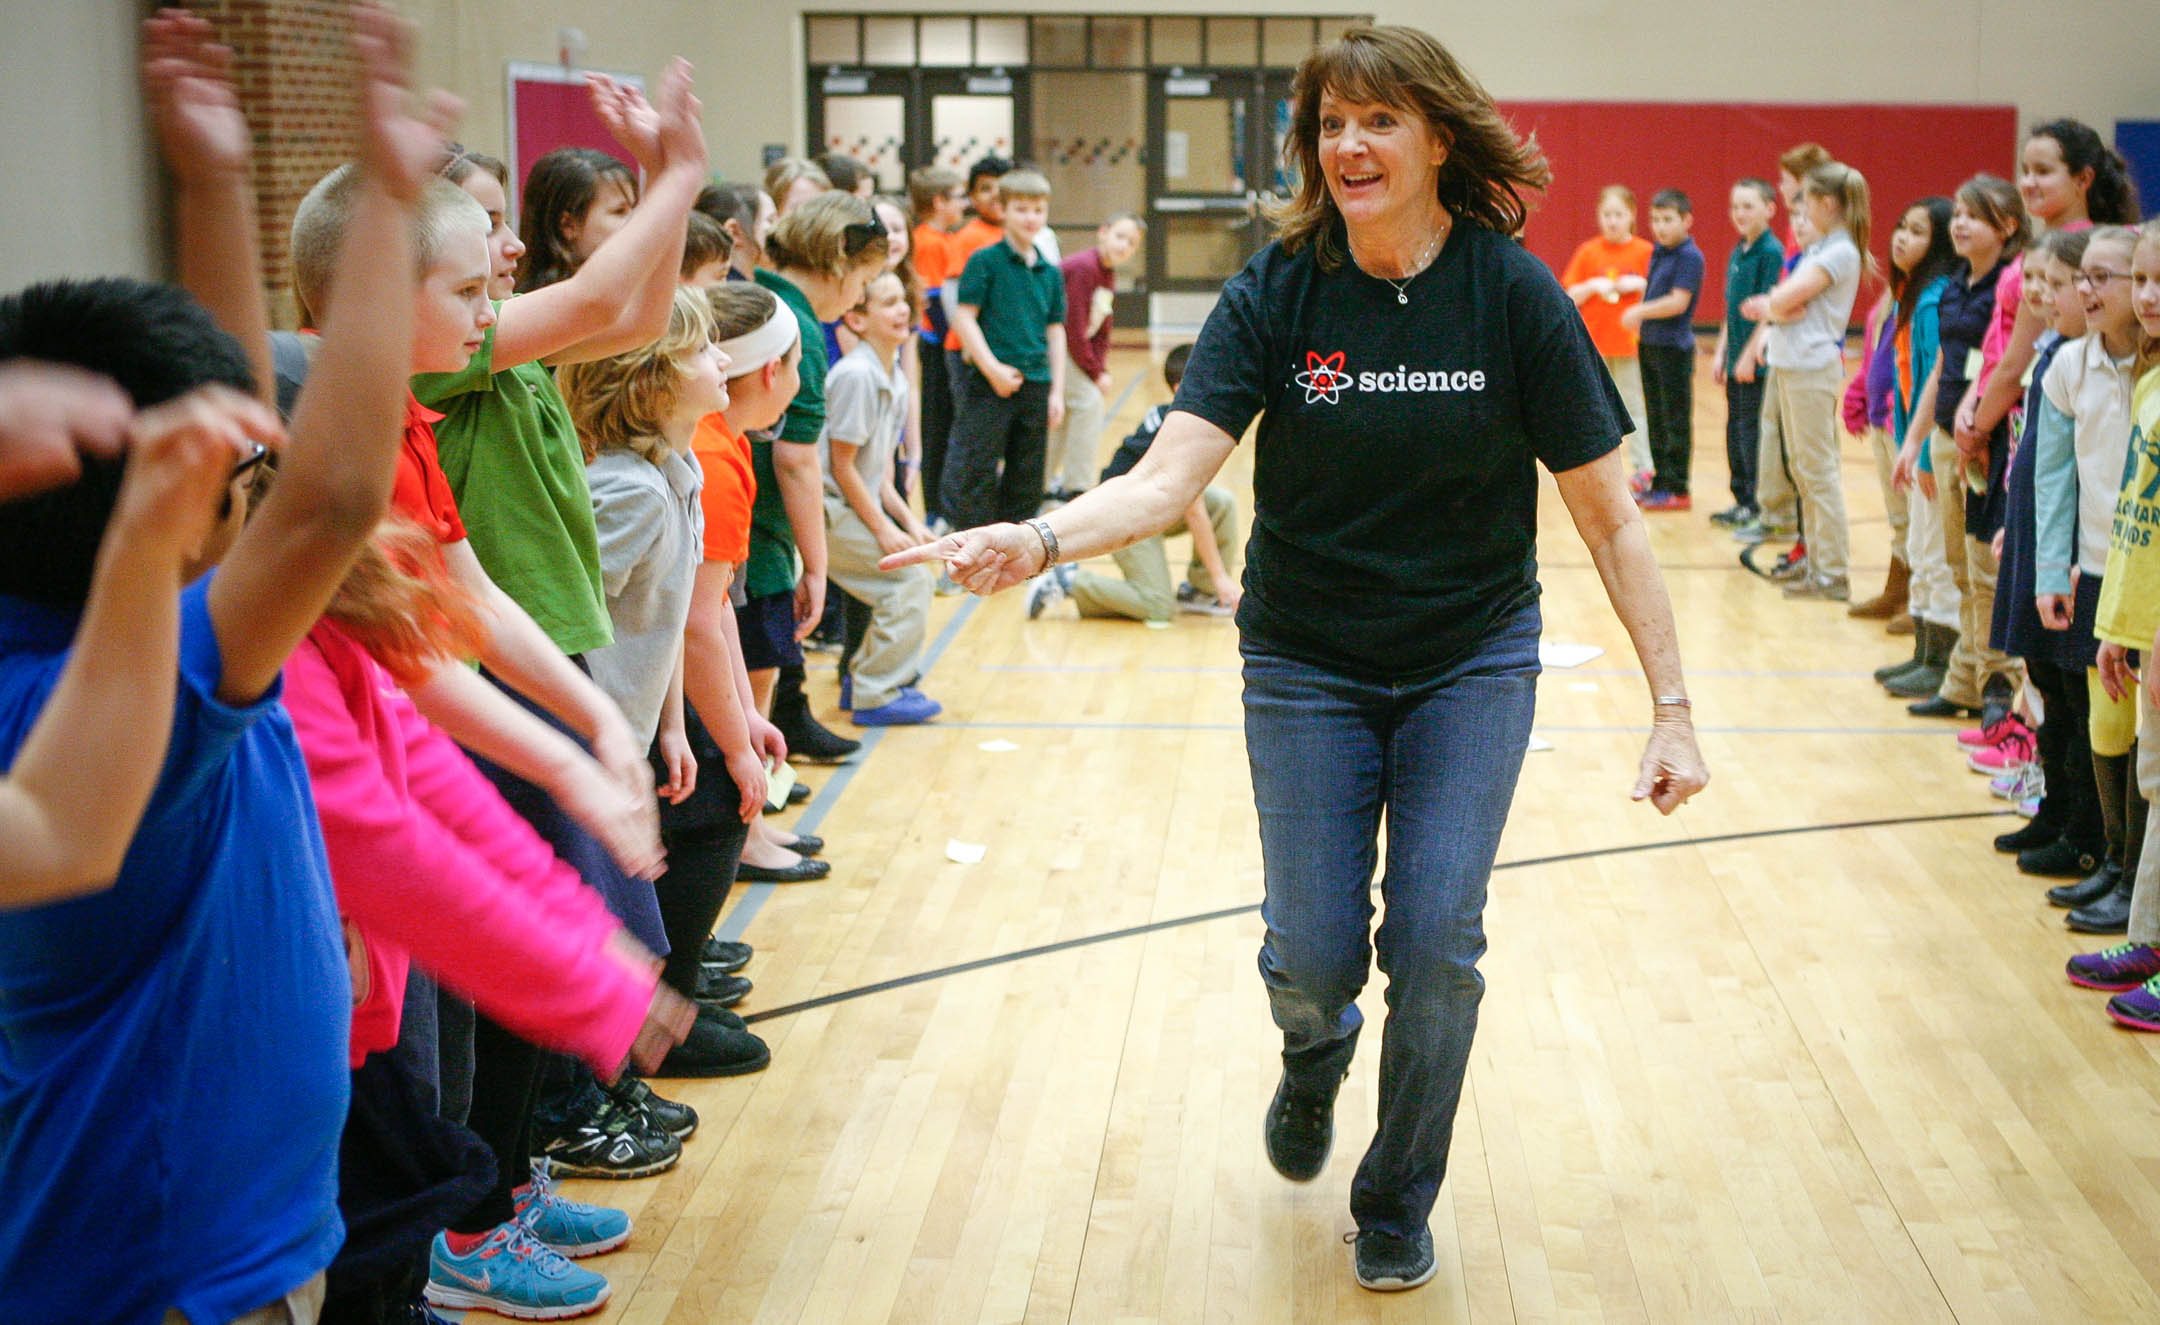 Sharon Roberson, a science lab teacher at Brooks Elementary (Bullitt County) demonstrates sound waves by having students do the wave during a lesson on the science of music. Photo by Mike Marsee, Feb. 19, 2016